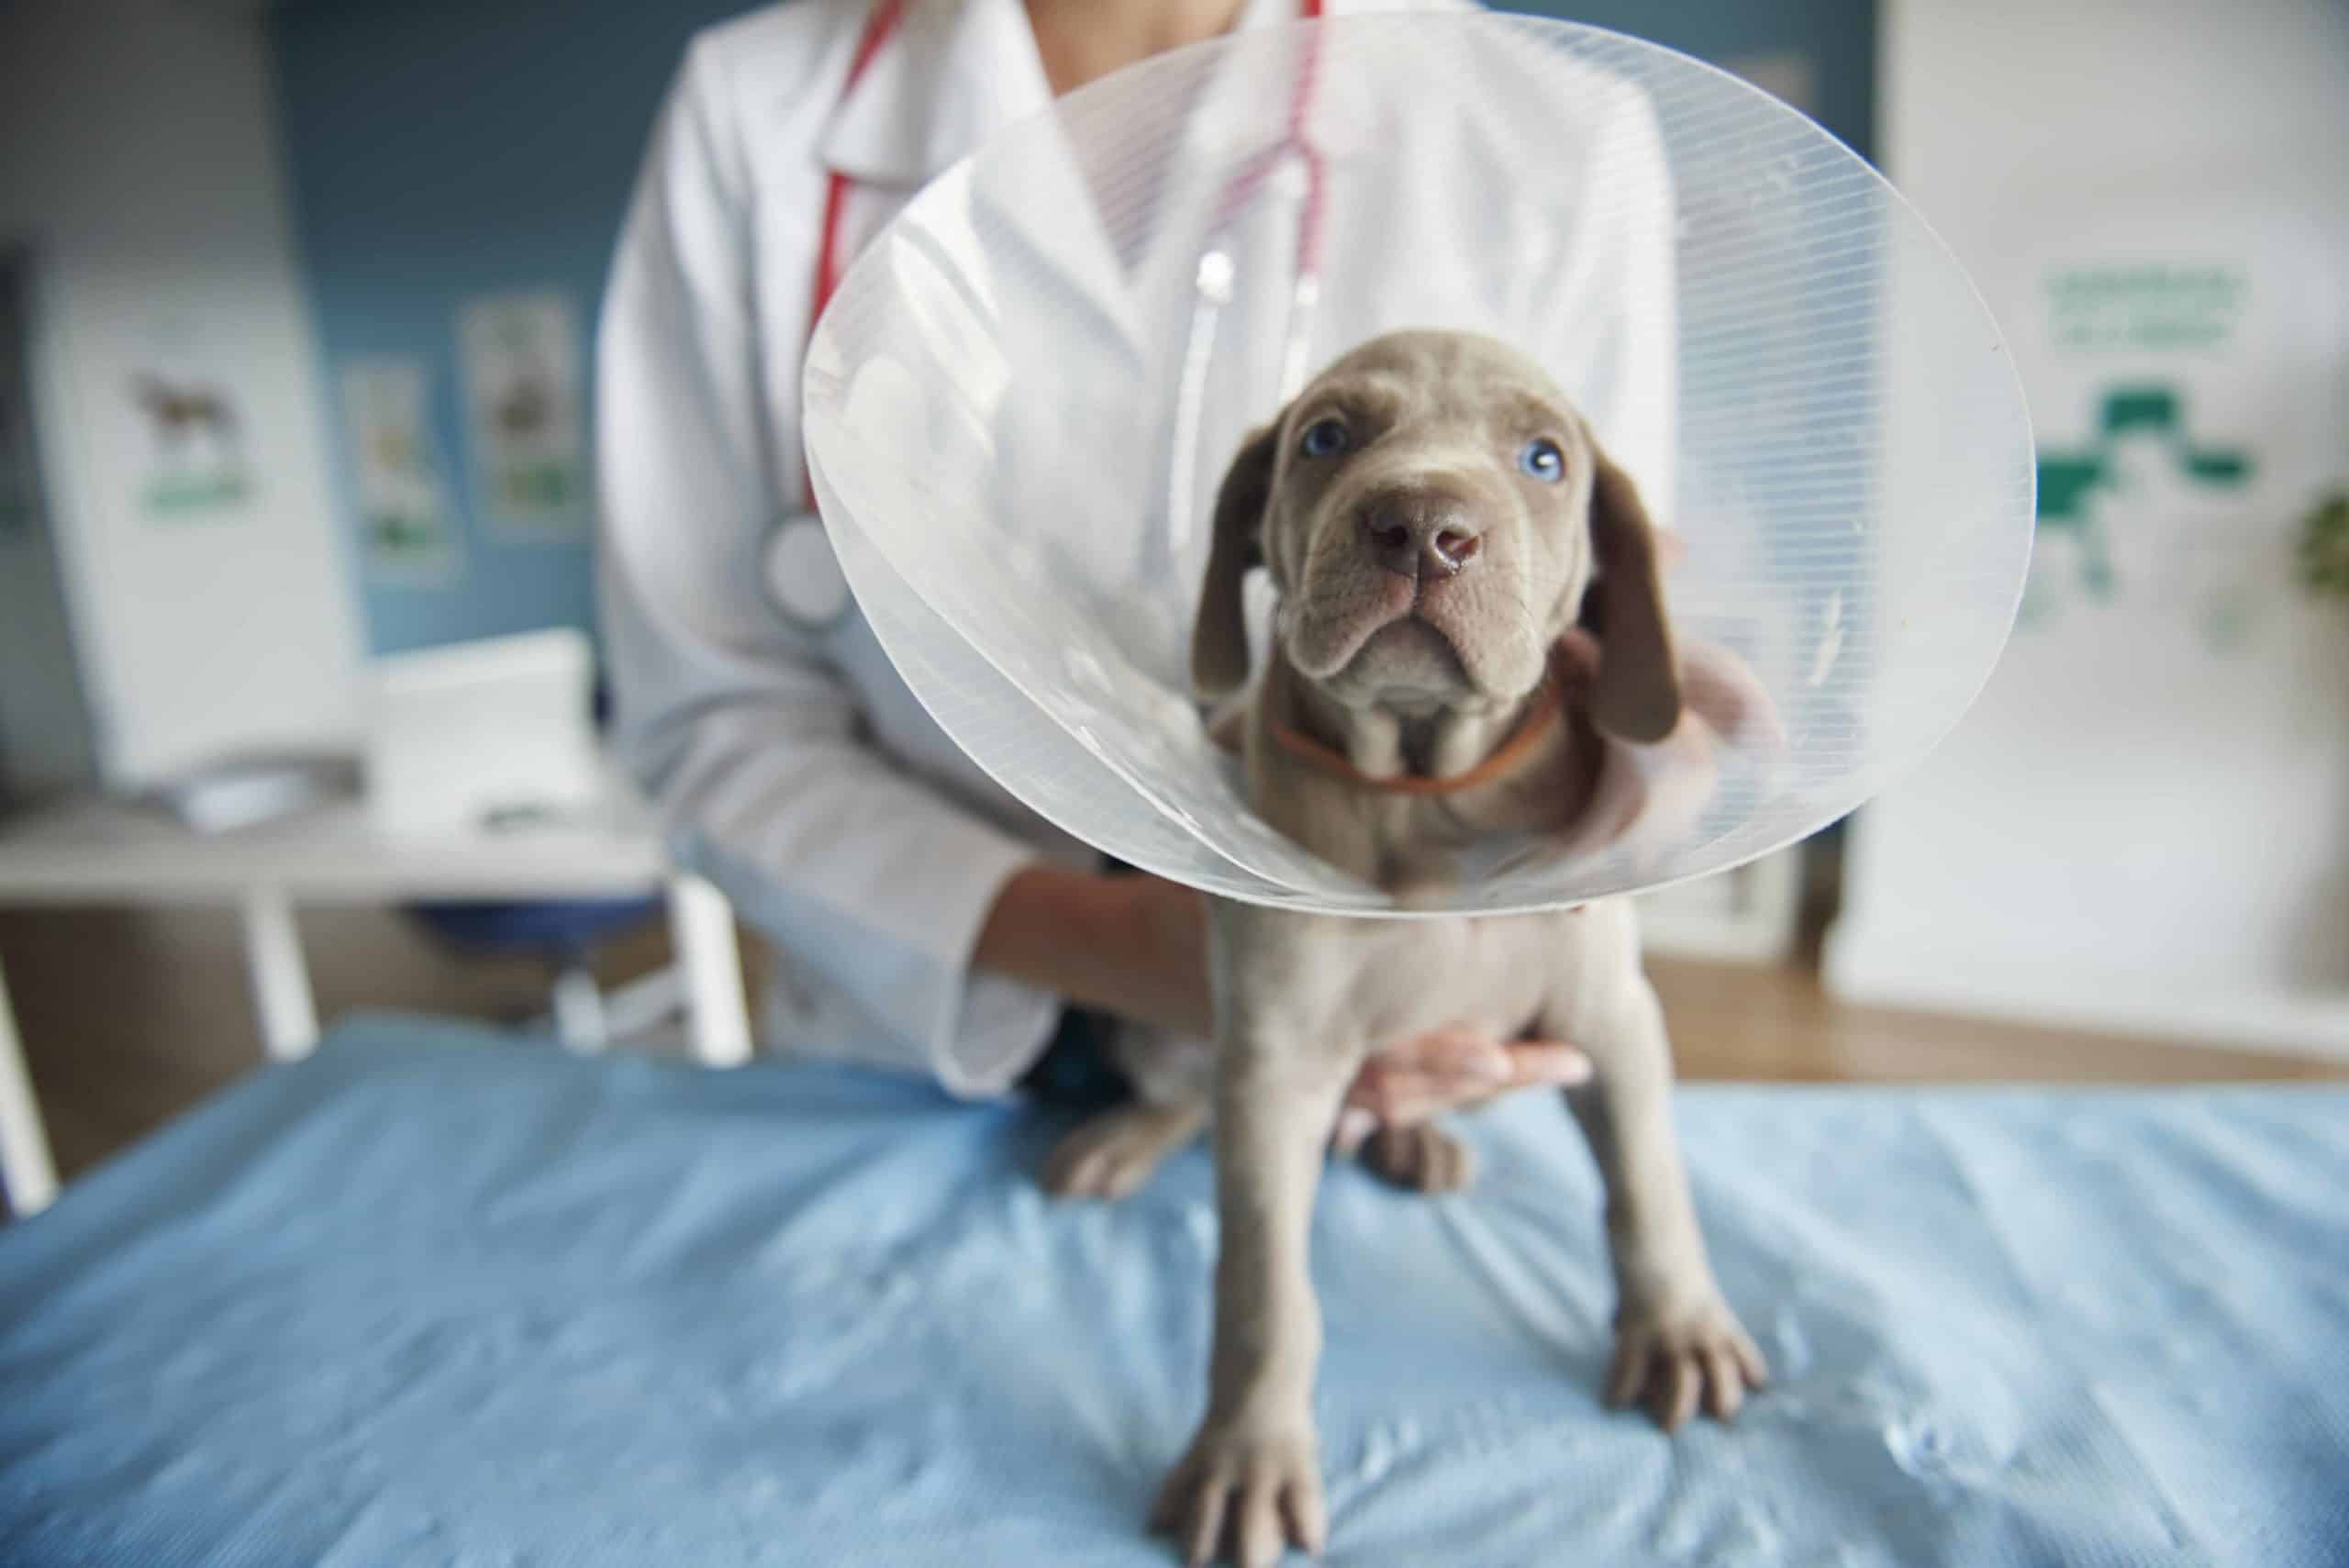 Weimaraner puppy wears an e-collar after surgery. Having pet insurance helps dog owners manage unexpected veterinarian costs.